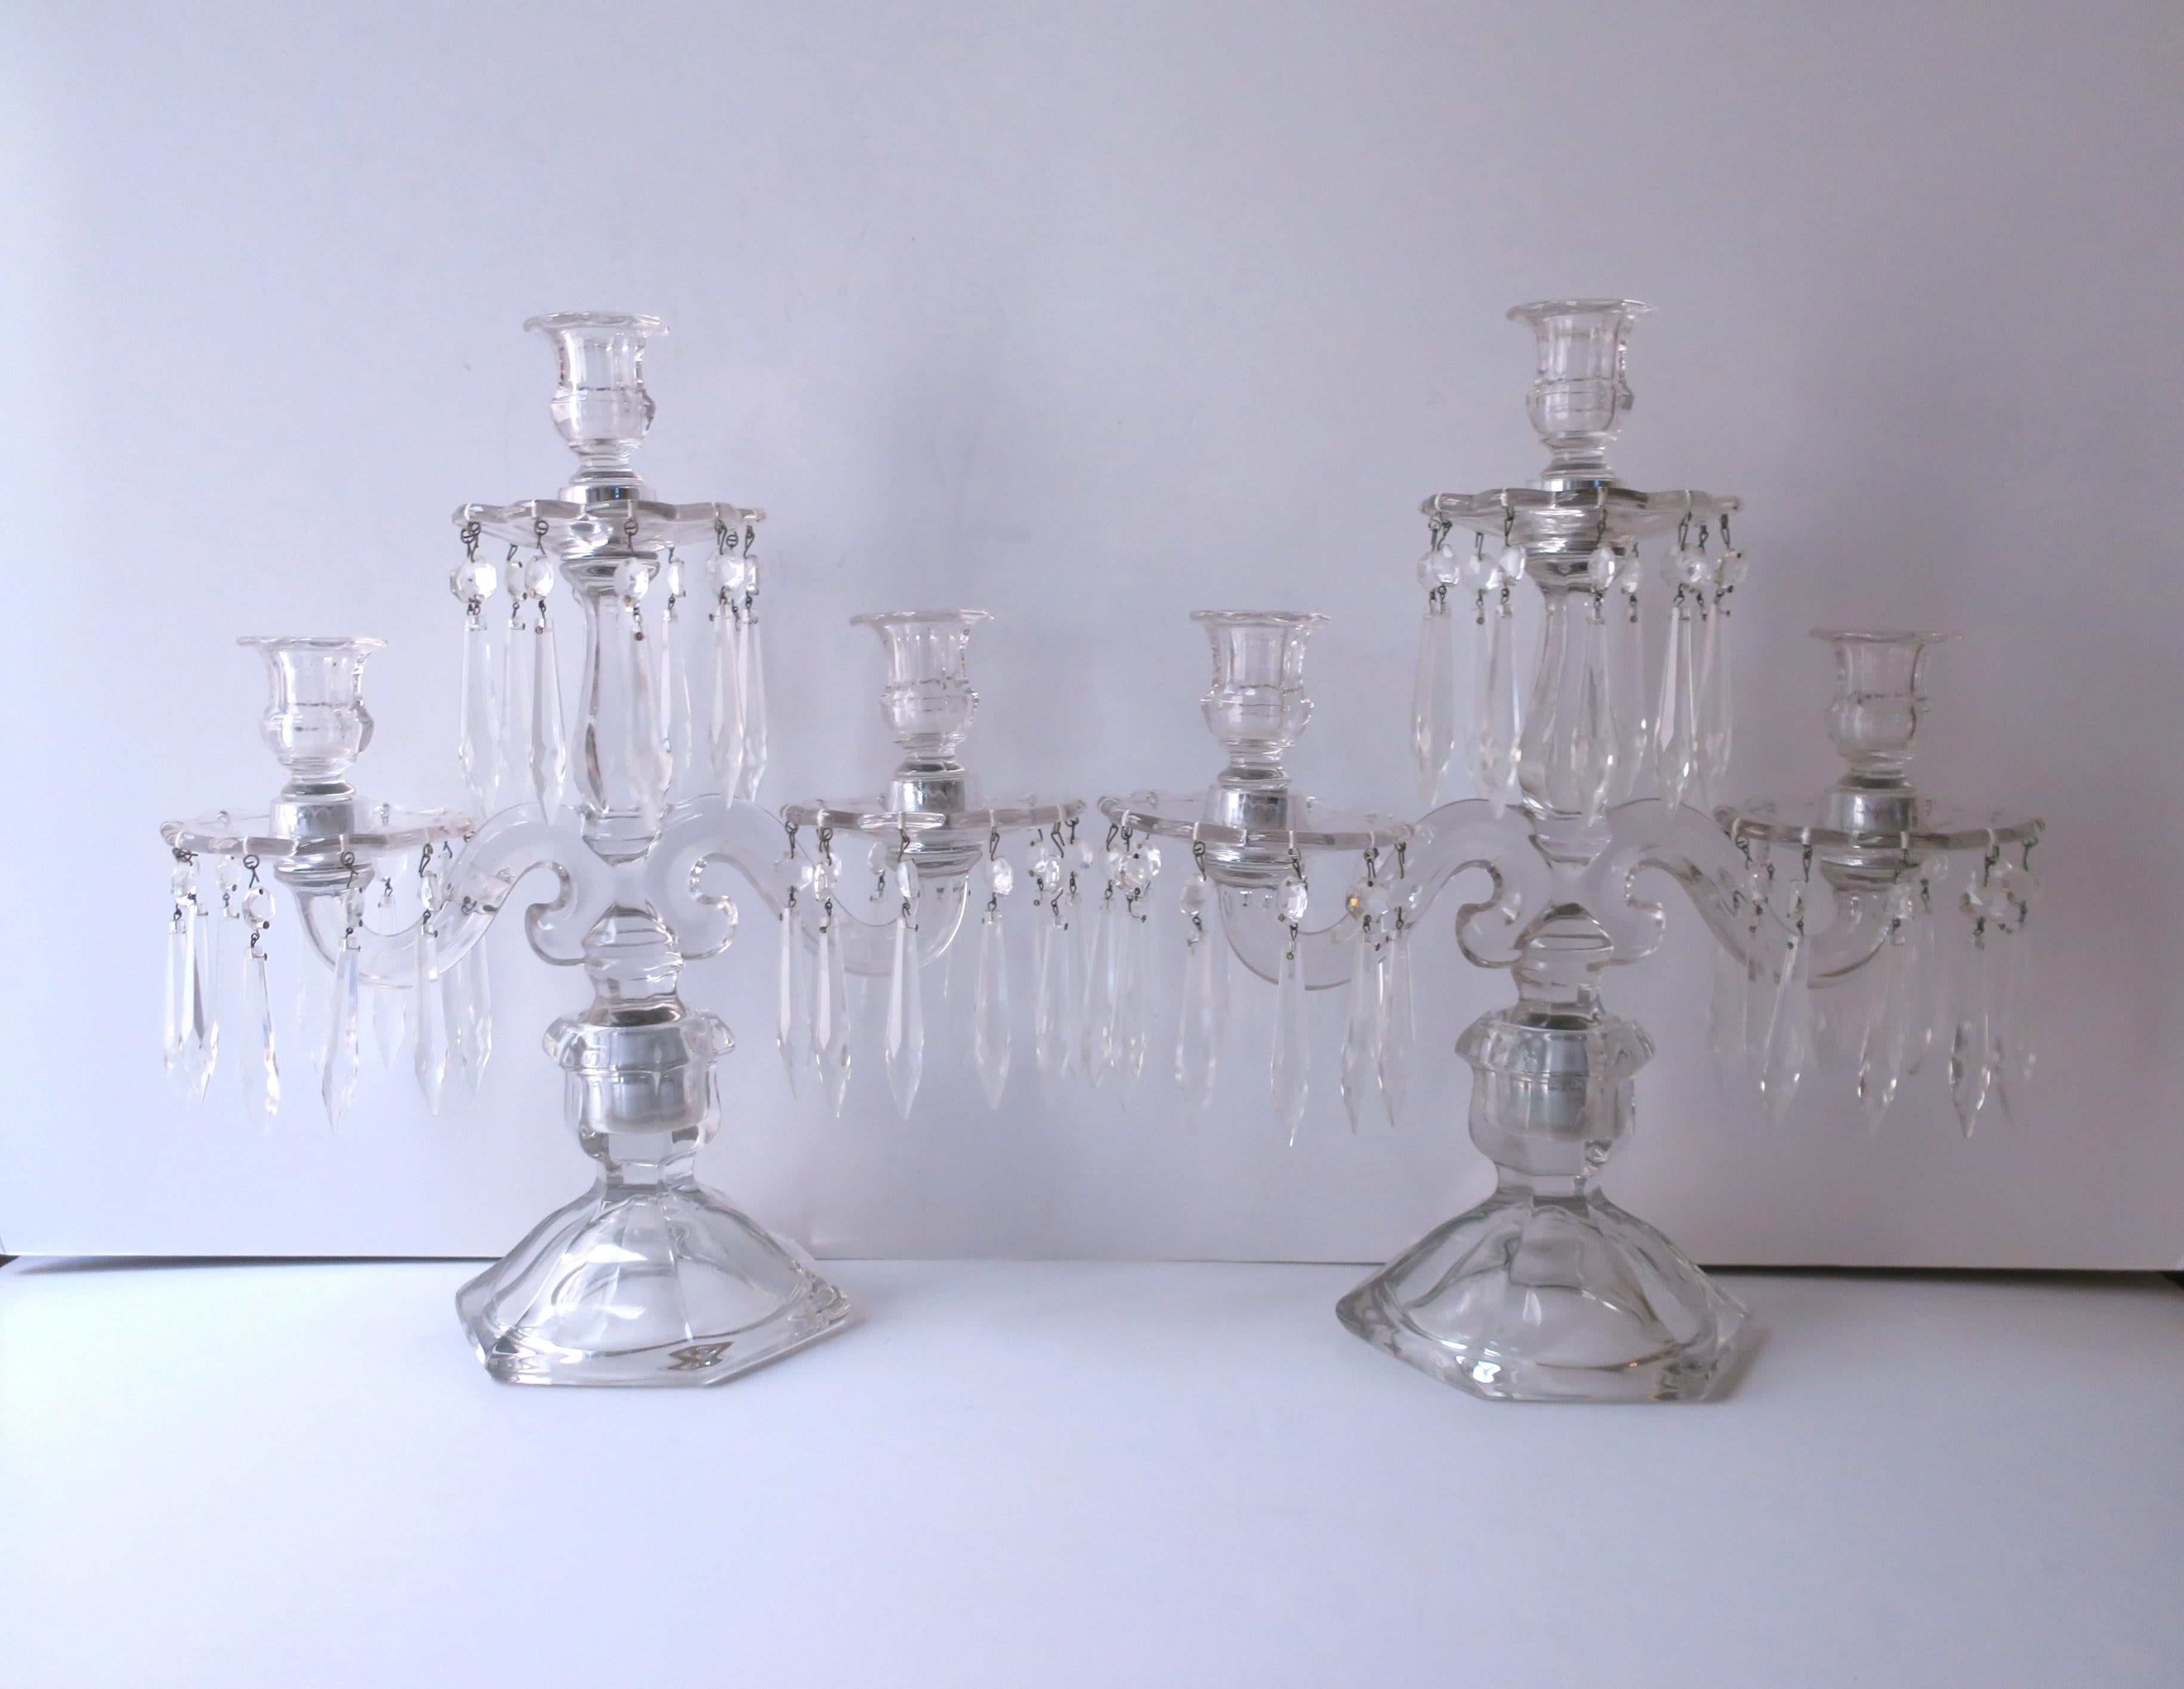 A beautiful pair of two arm, three light, transparent glass candelabras with crystal drop prisms and removable bobeches, circa mid-20th century. A bobeche is a glass collar on a candle socket to catch drippings and/or to hold suspended crystal